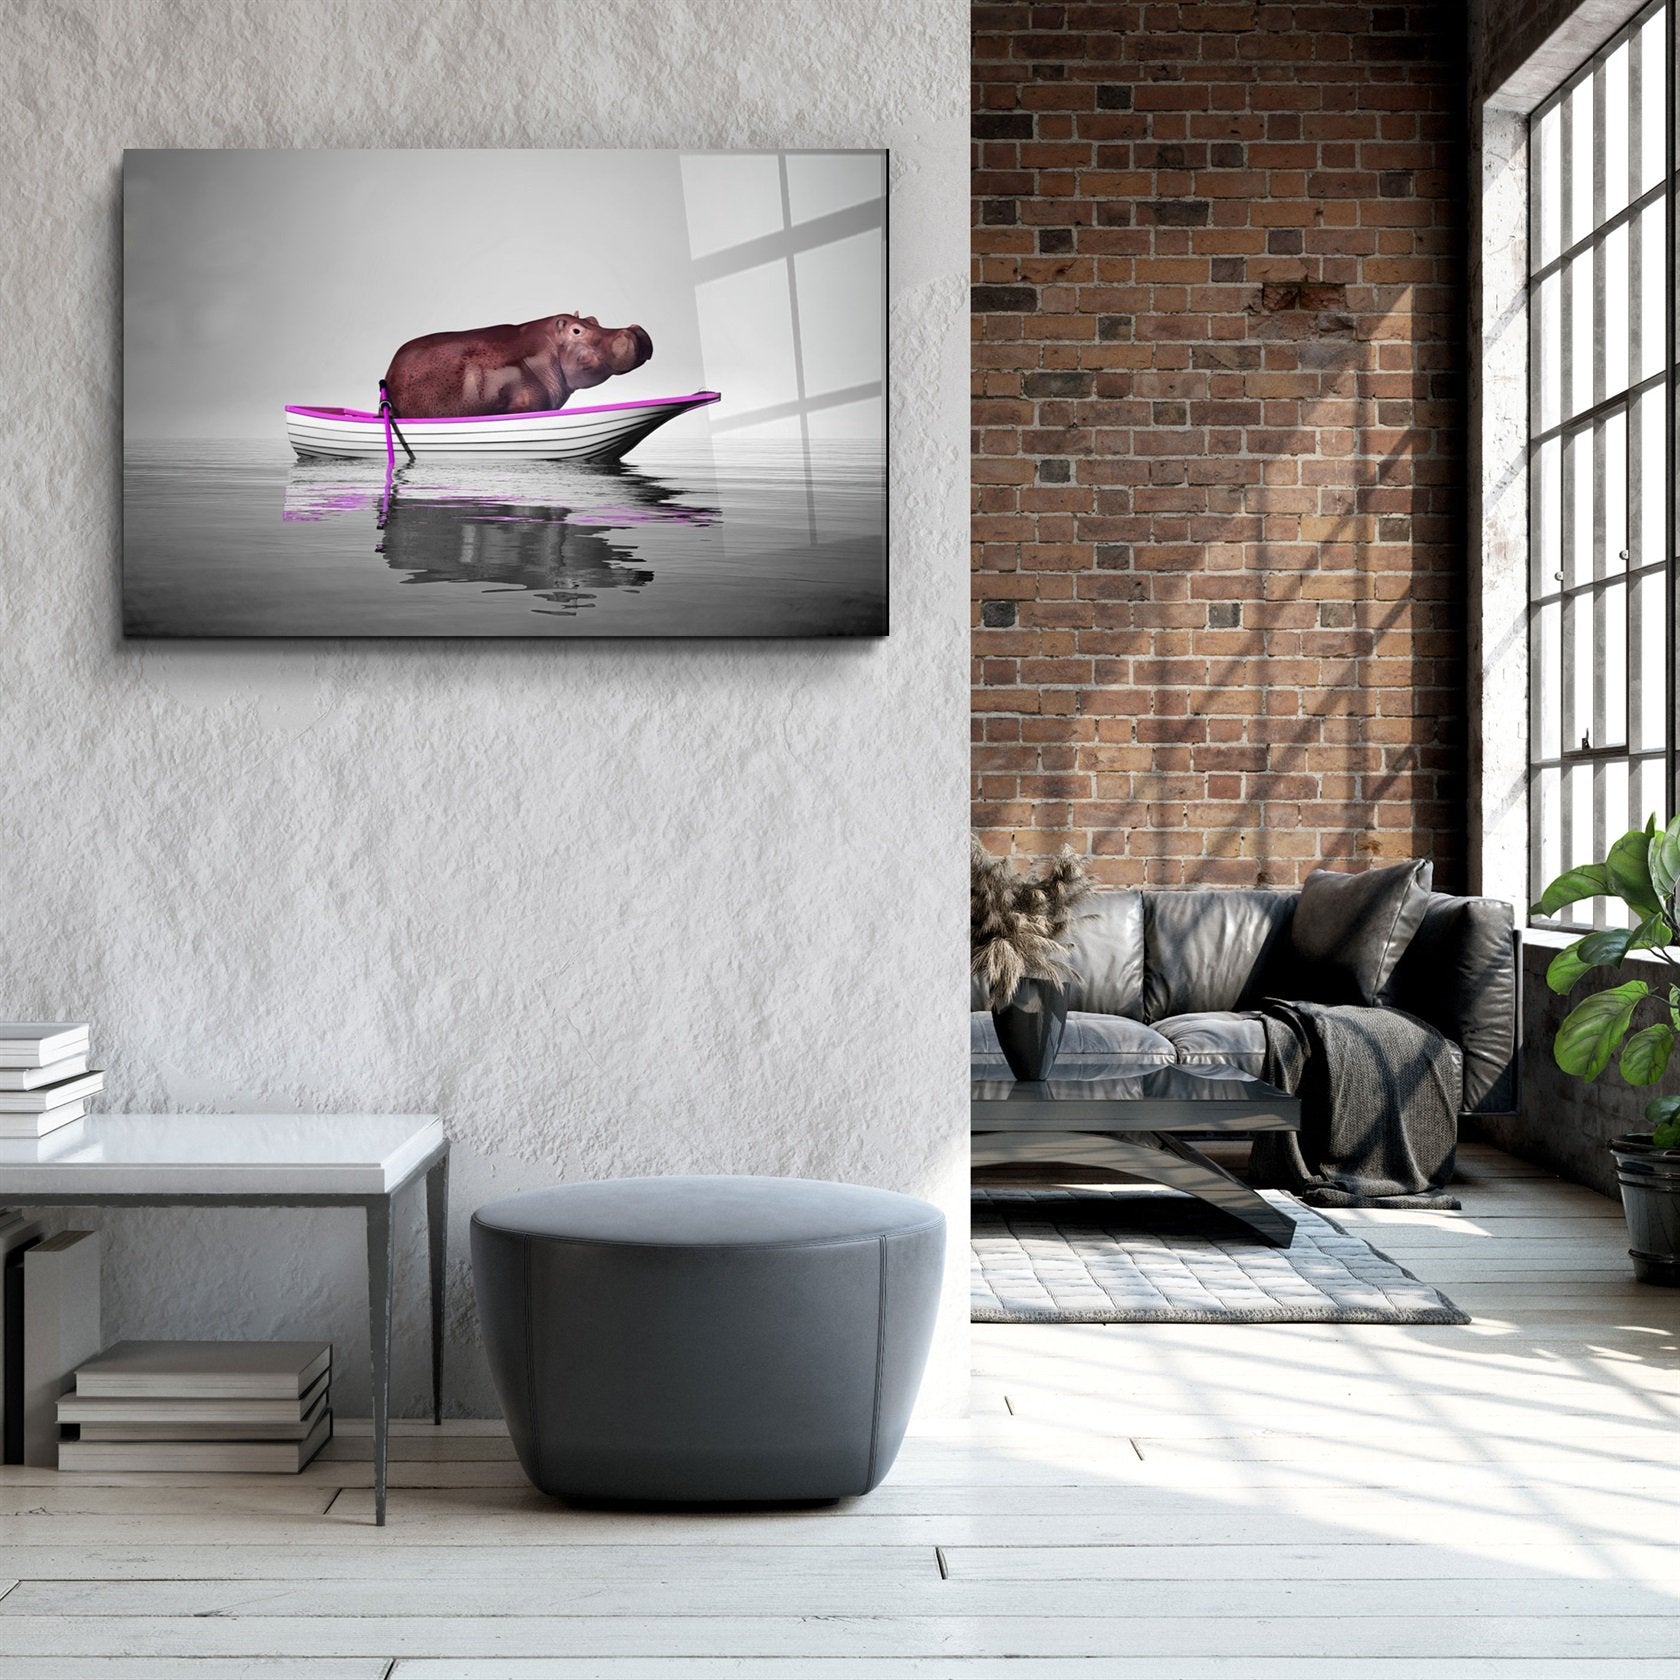 ・"Hippo on the Boat 2"・Glass Wall Art